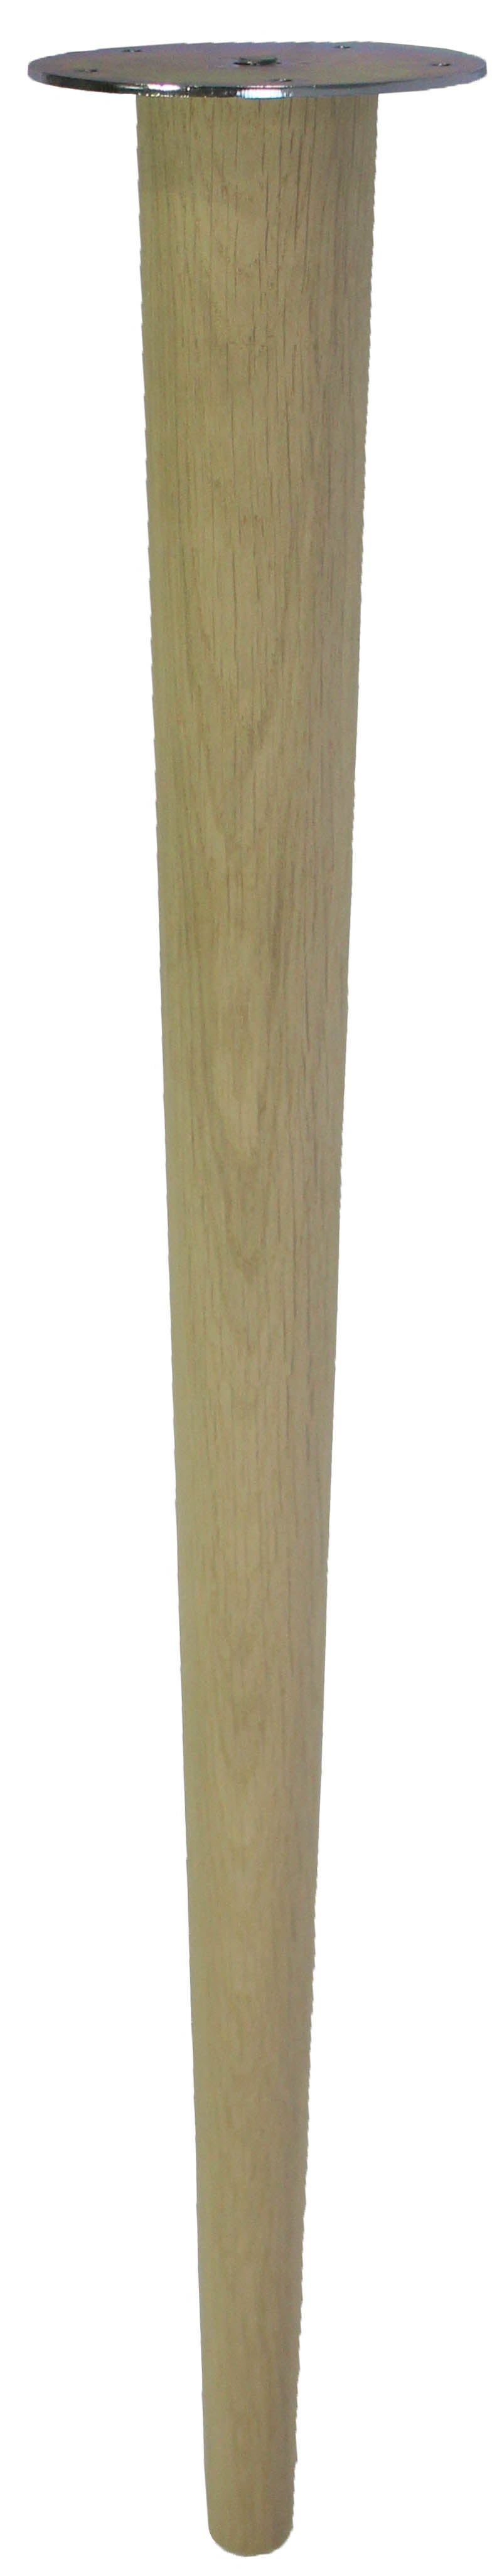 McCobb Solid Oak Table Legs Short - Raw Finish - Set of 4 - Including Specialist Table Fixing Plates and Screws